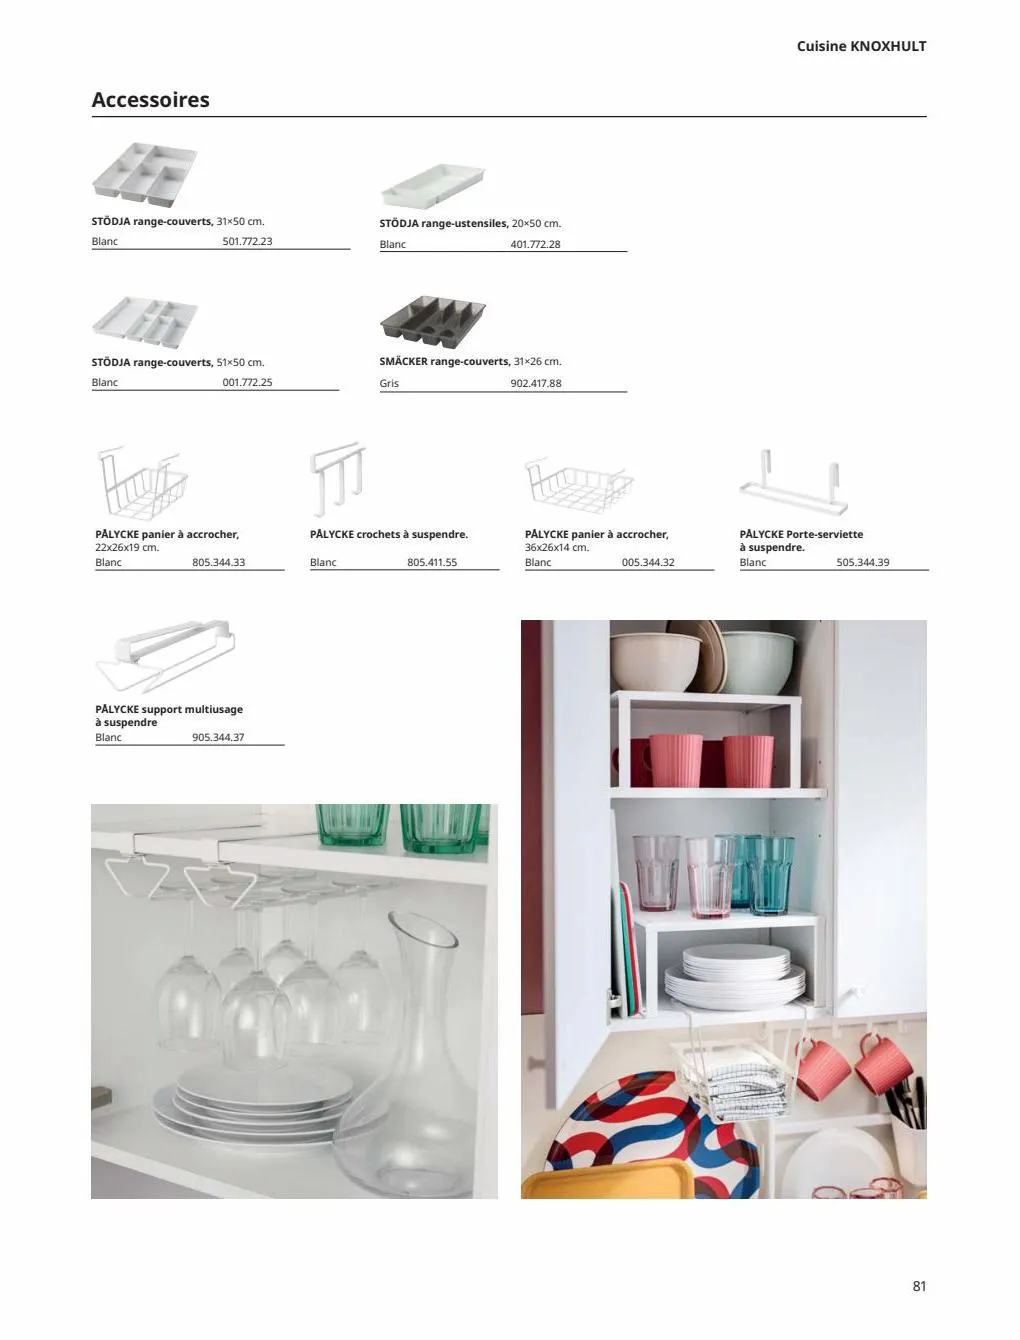 Catalogue IKEA CUISINES Guide d’achat 2023, page 00081